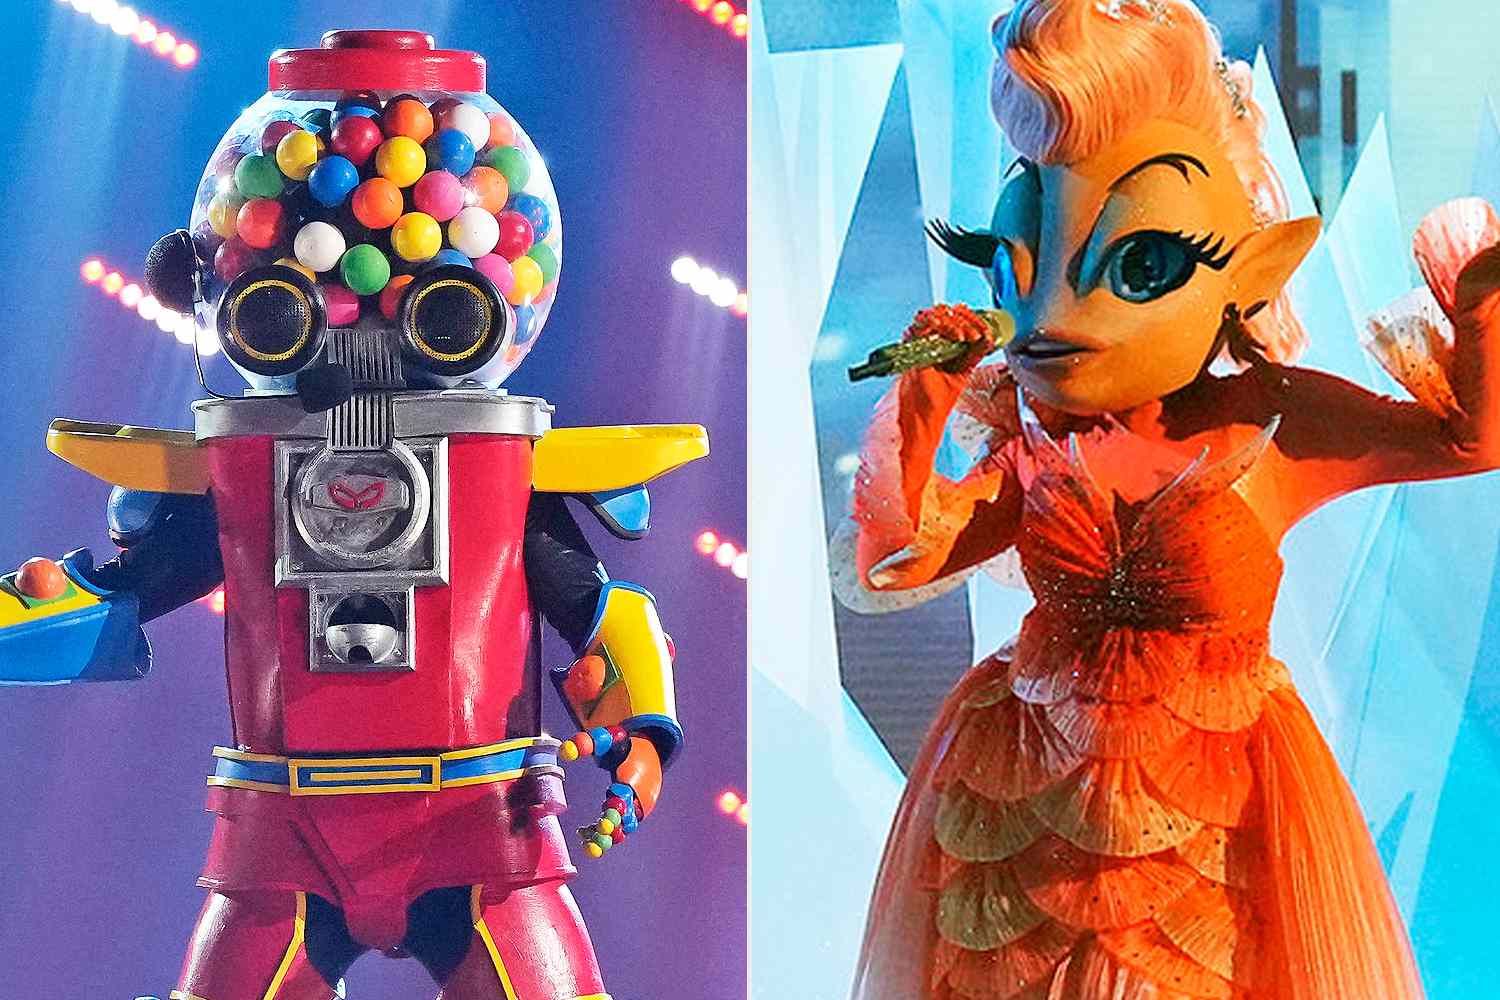 'The Masked Singer' Season 11 Picks a Winner! Find Out Whether Goldfish or Gumball Snagged the Golden Mask Trophy